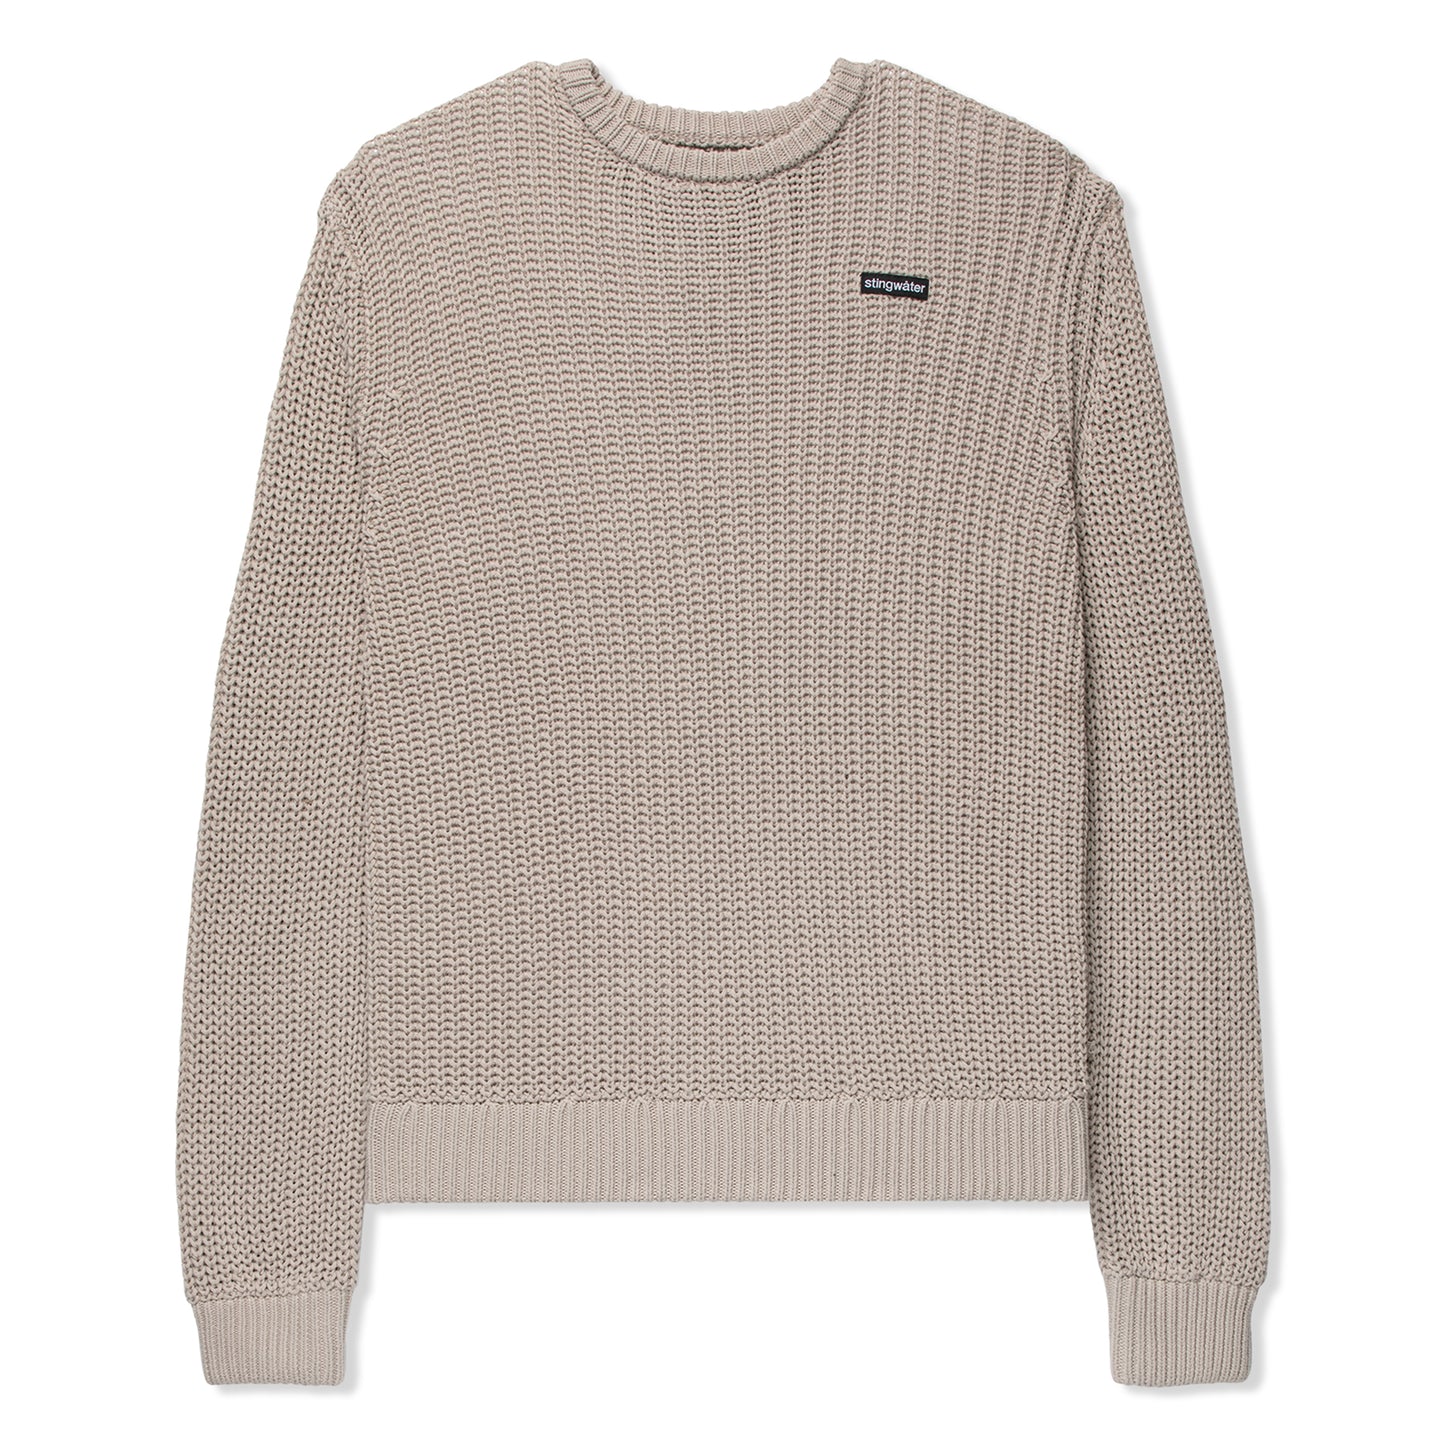 Stingwater Leave Me Alone Knit Sweater (Oatmeal)